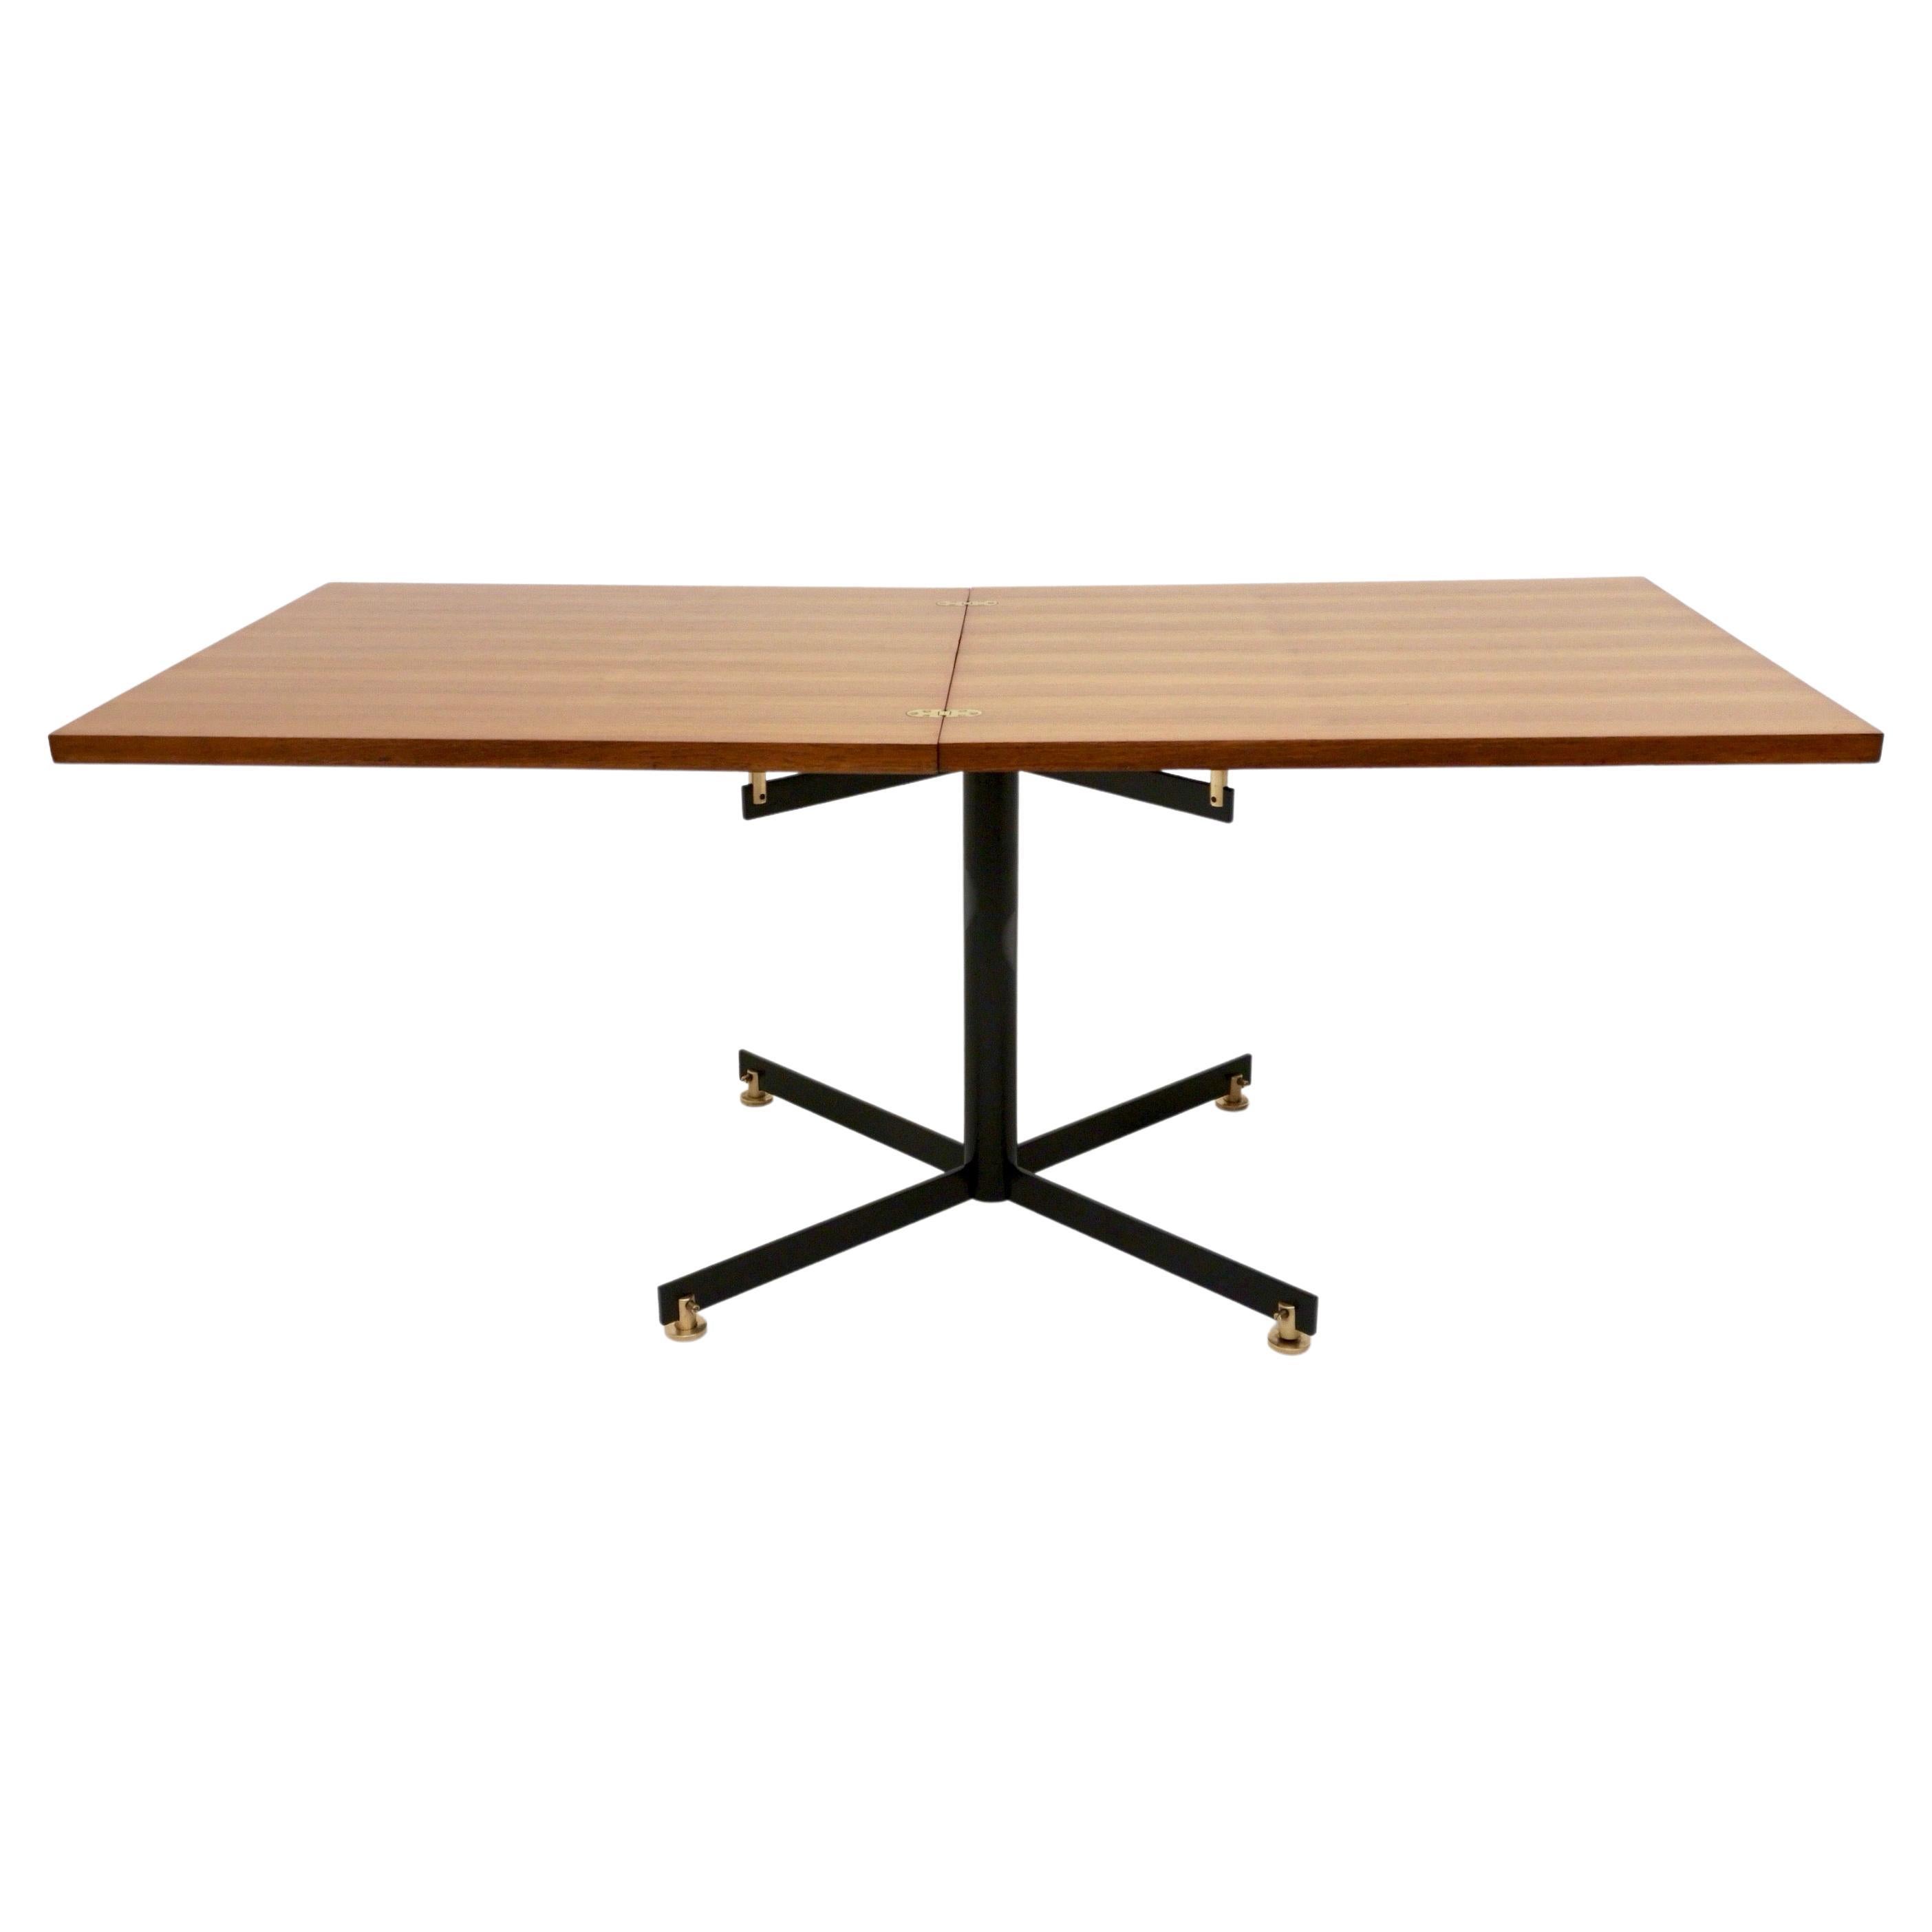 Vintage Extendible Teak and White Formica Dining Table with Metal Pedestal For Sale